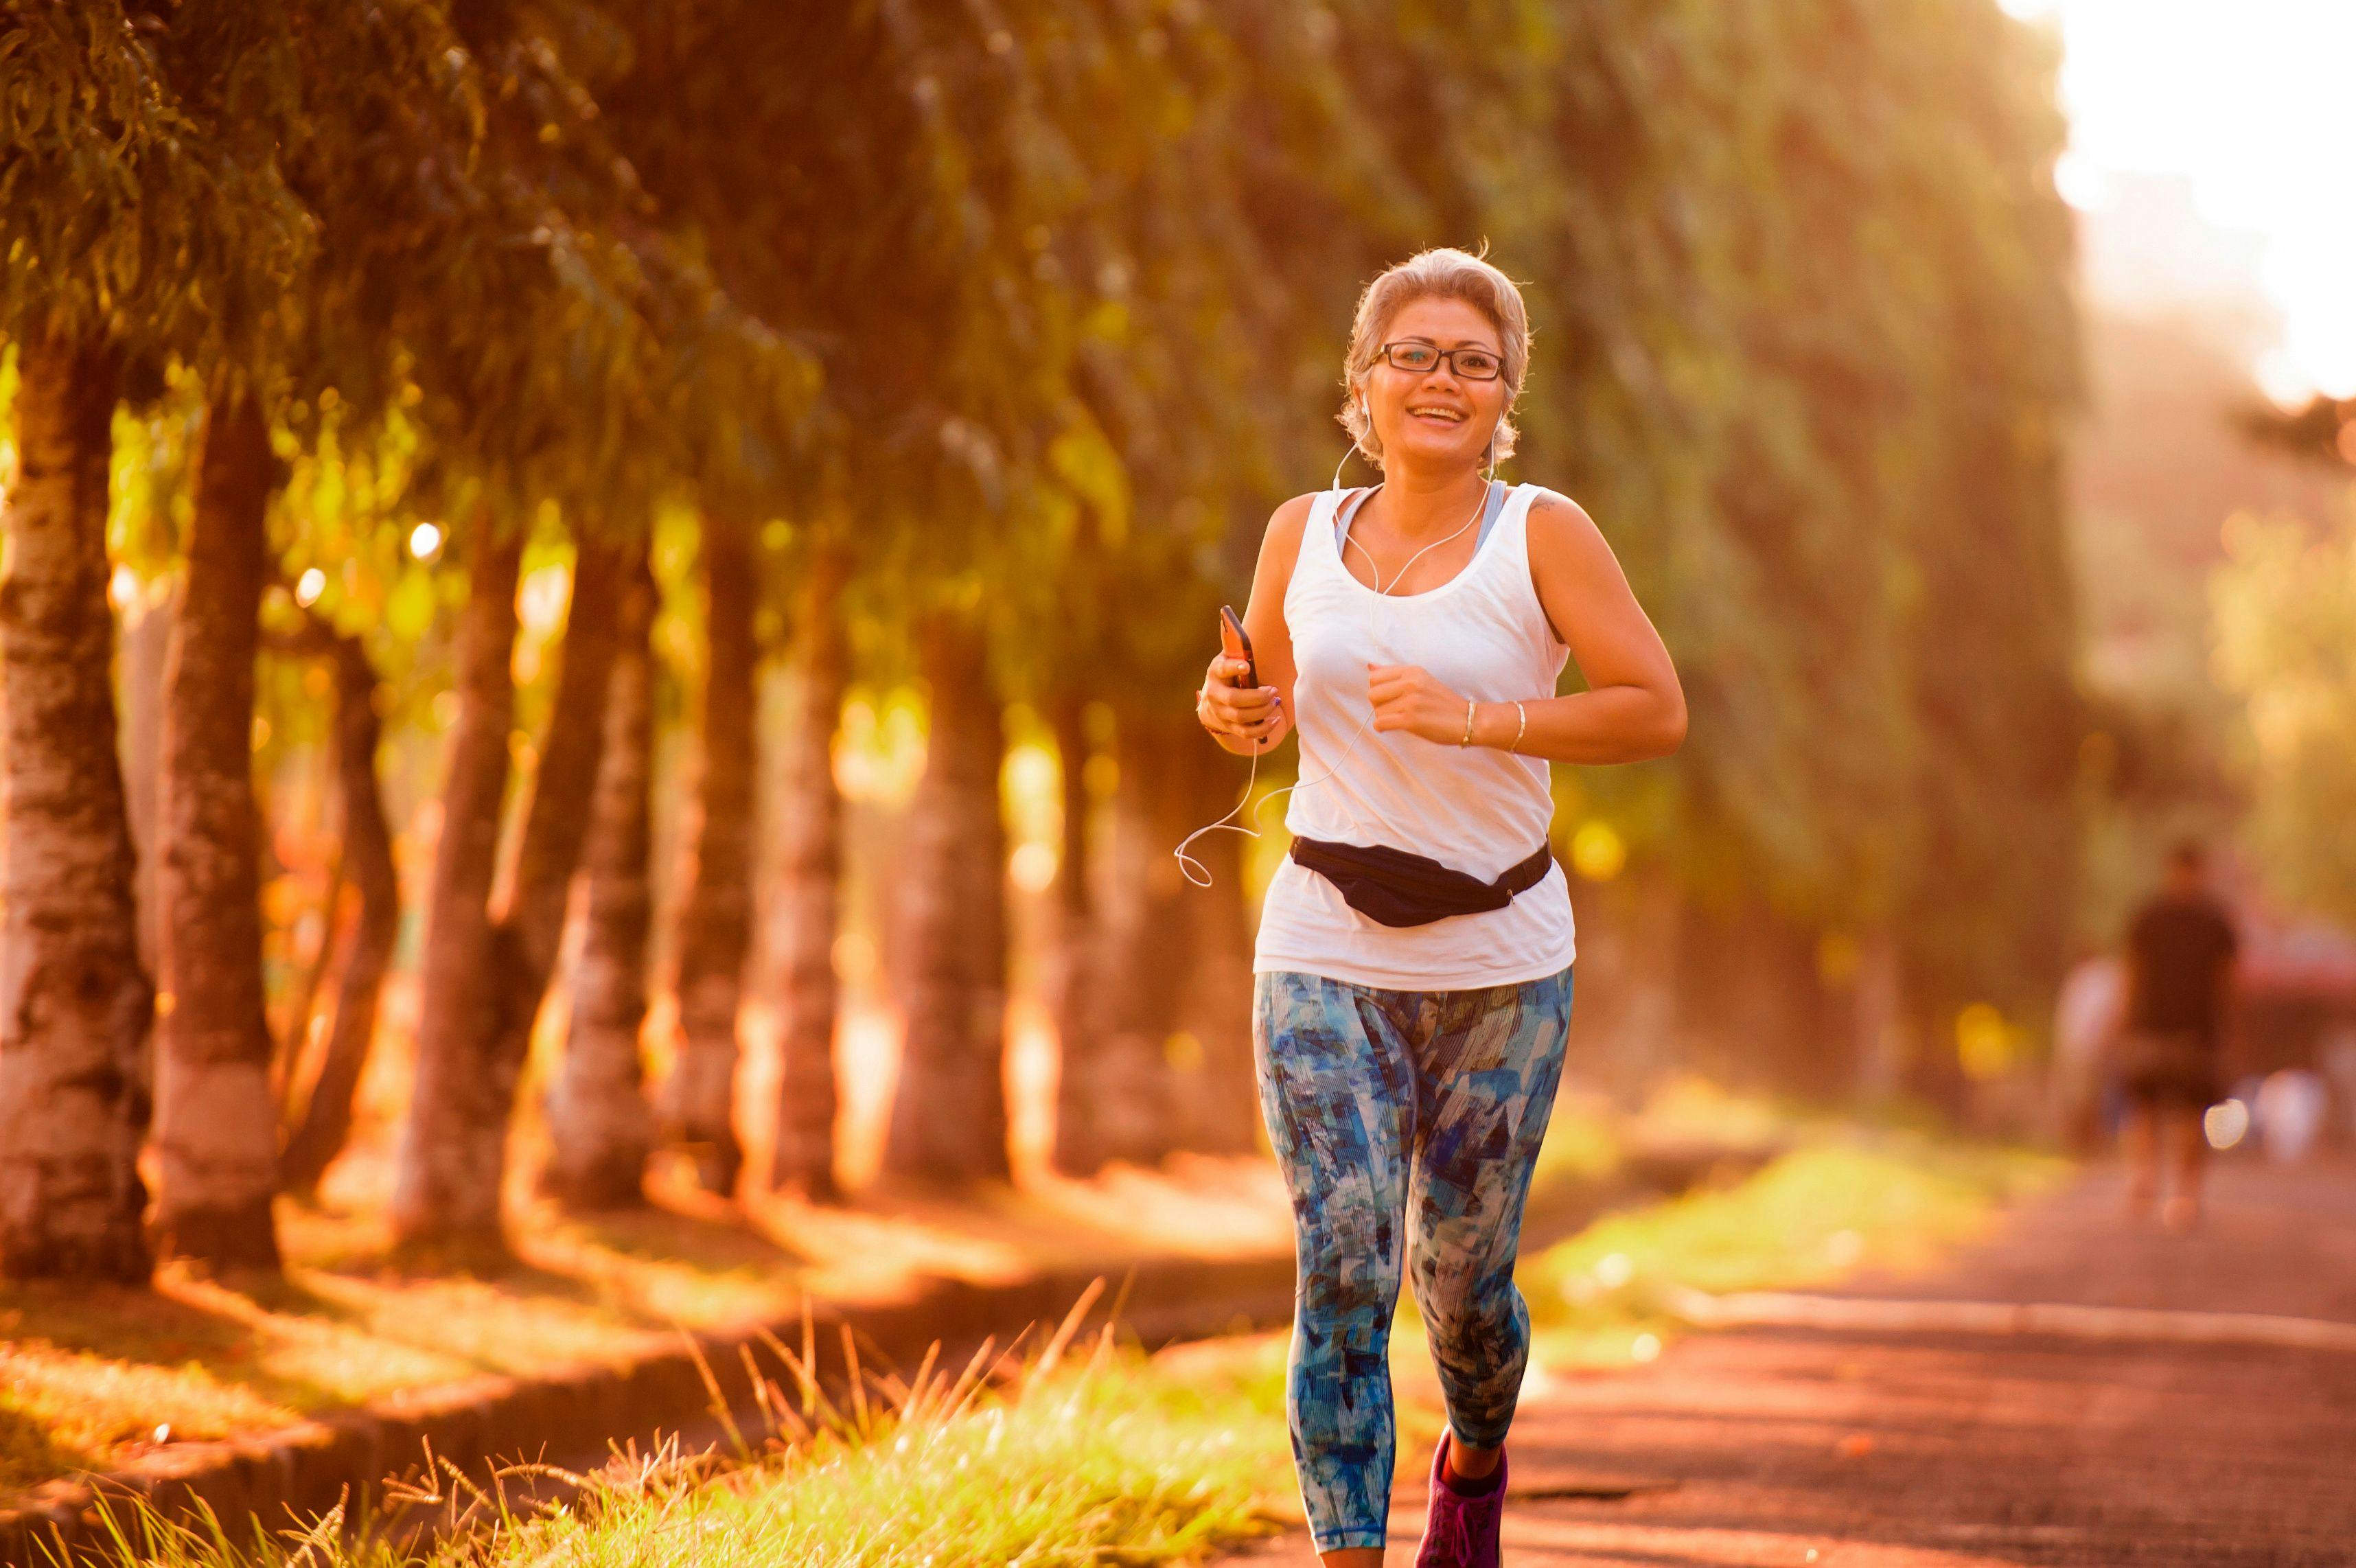 middle aged 40s or 50s happy and attractive woman with grey hair training at city park with green trees on sunrise doing running and jogging workout in health care | Image Credit: TheVisualsYouNeed – stock.adobe.com